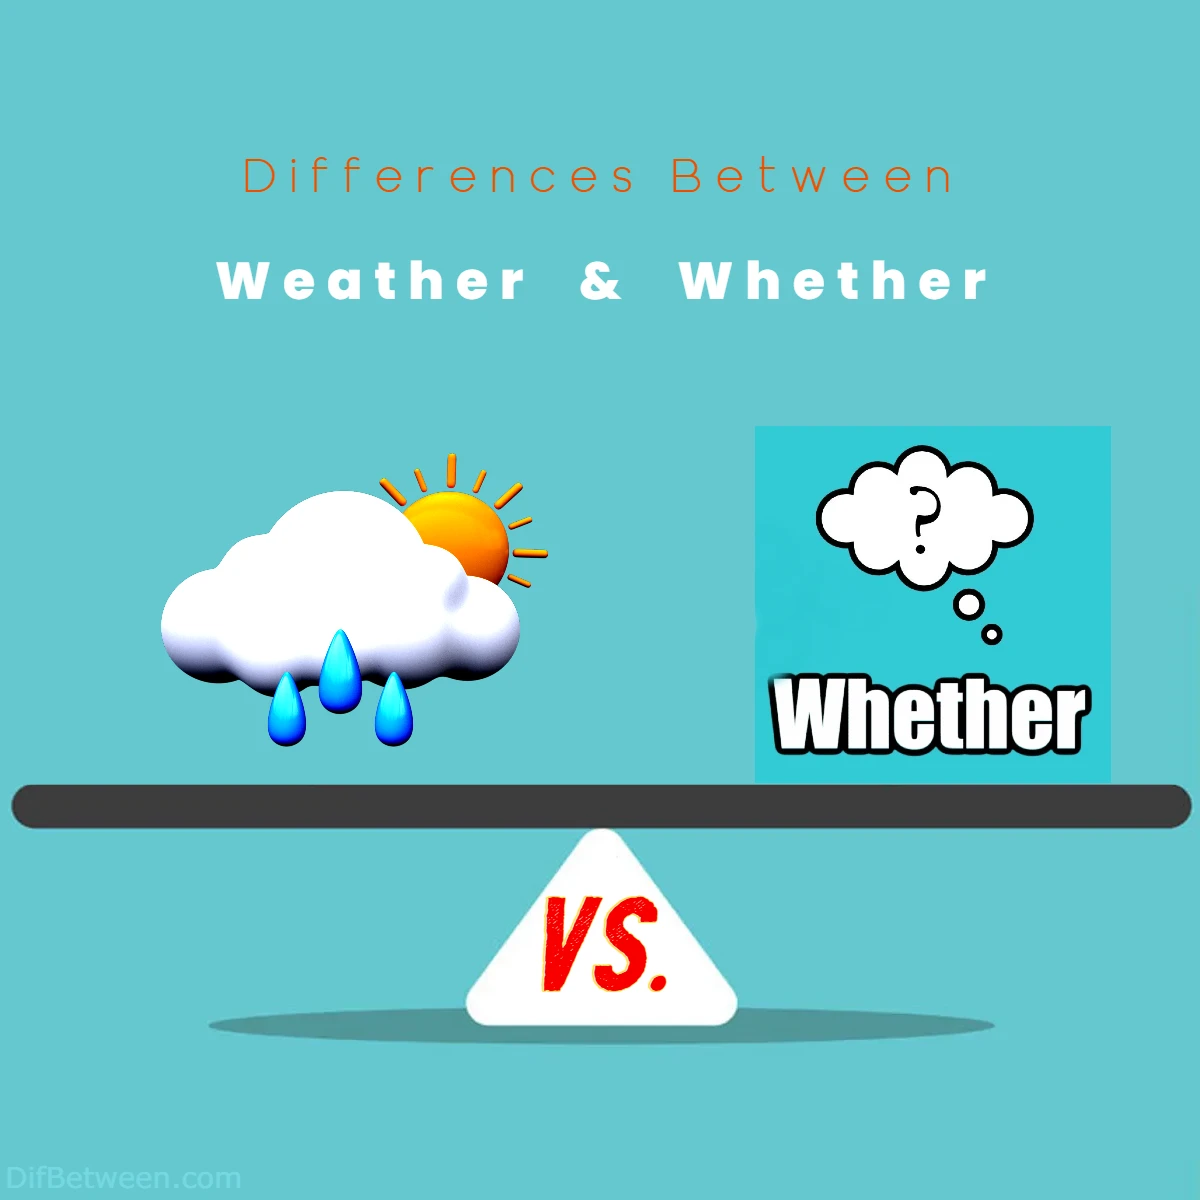 Differences Between Weather vs Whether